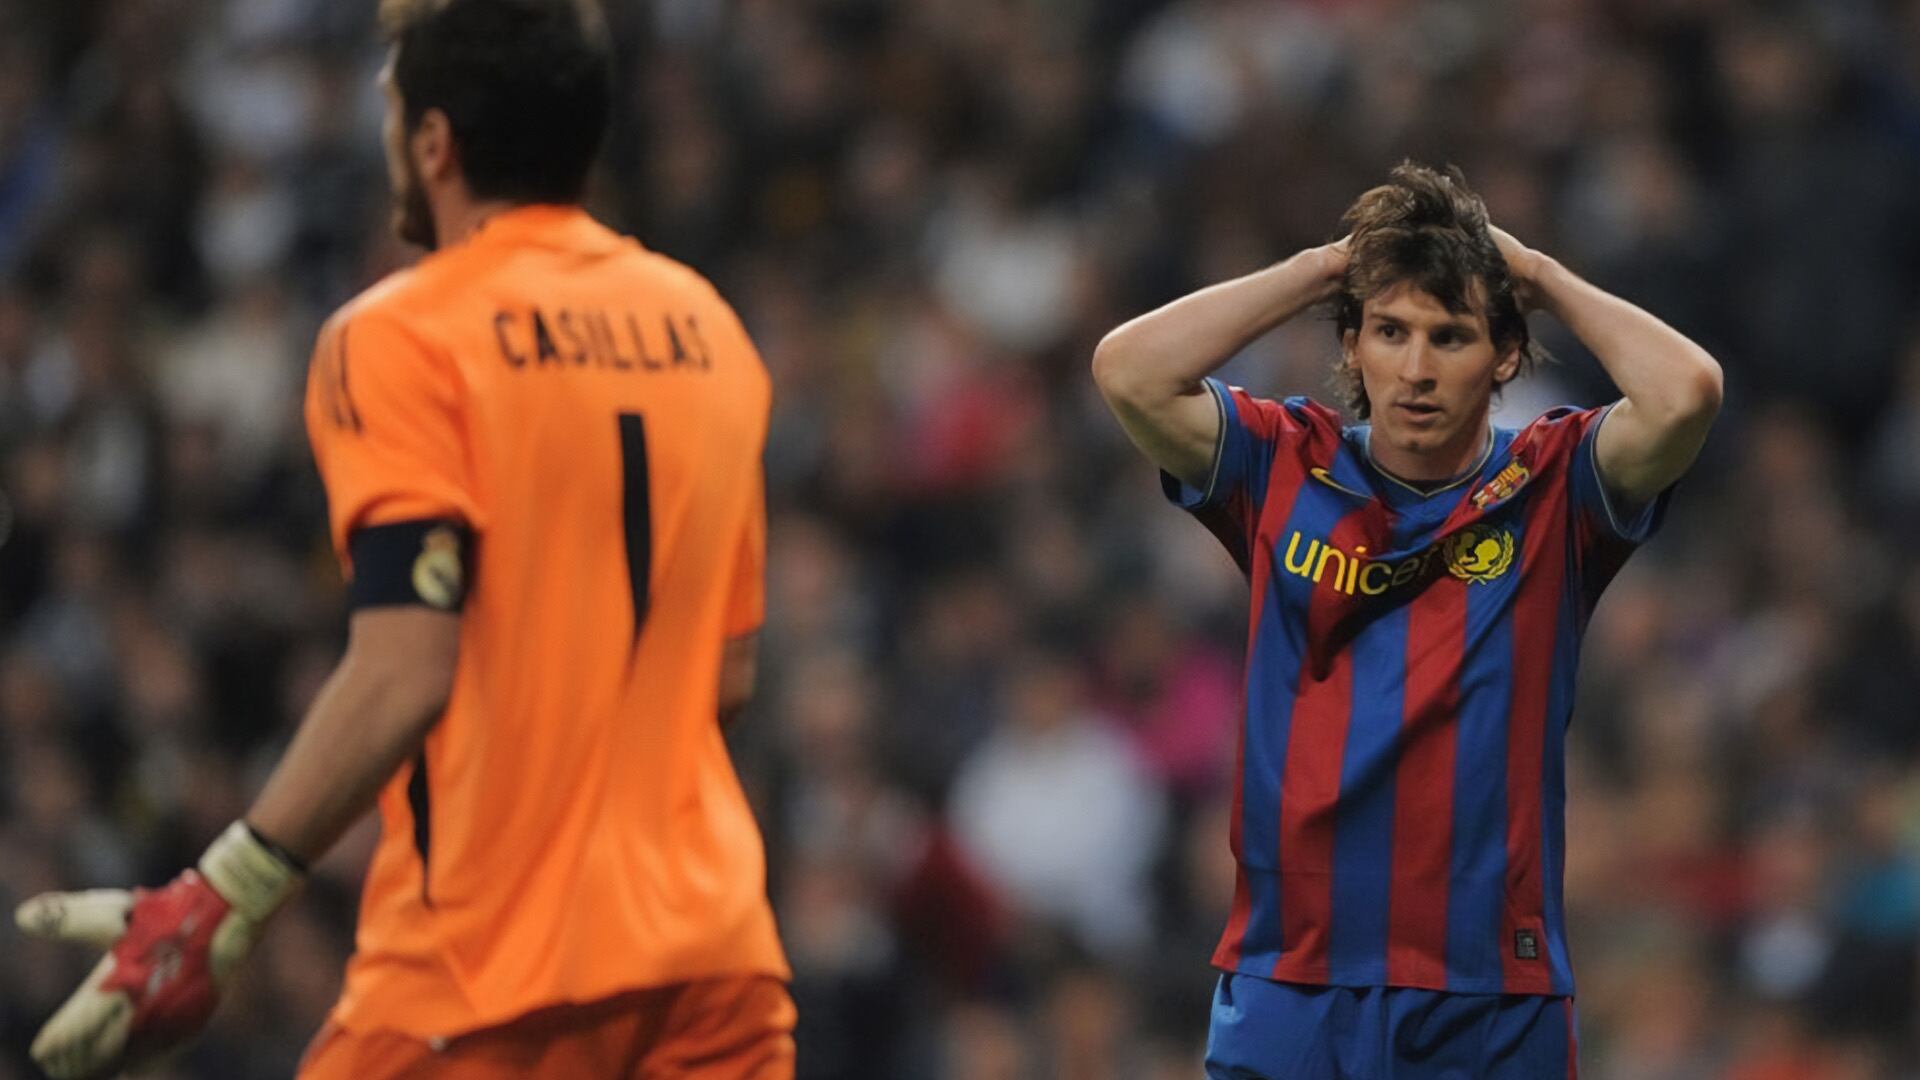 Real Madrid's illness, the reactions after Casillas' comment to Messi